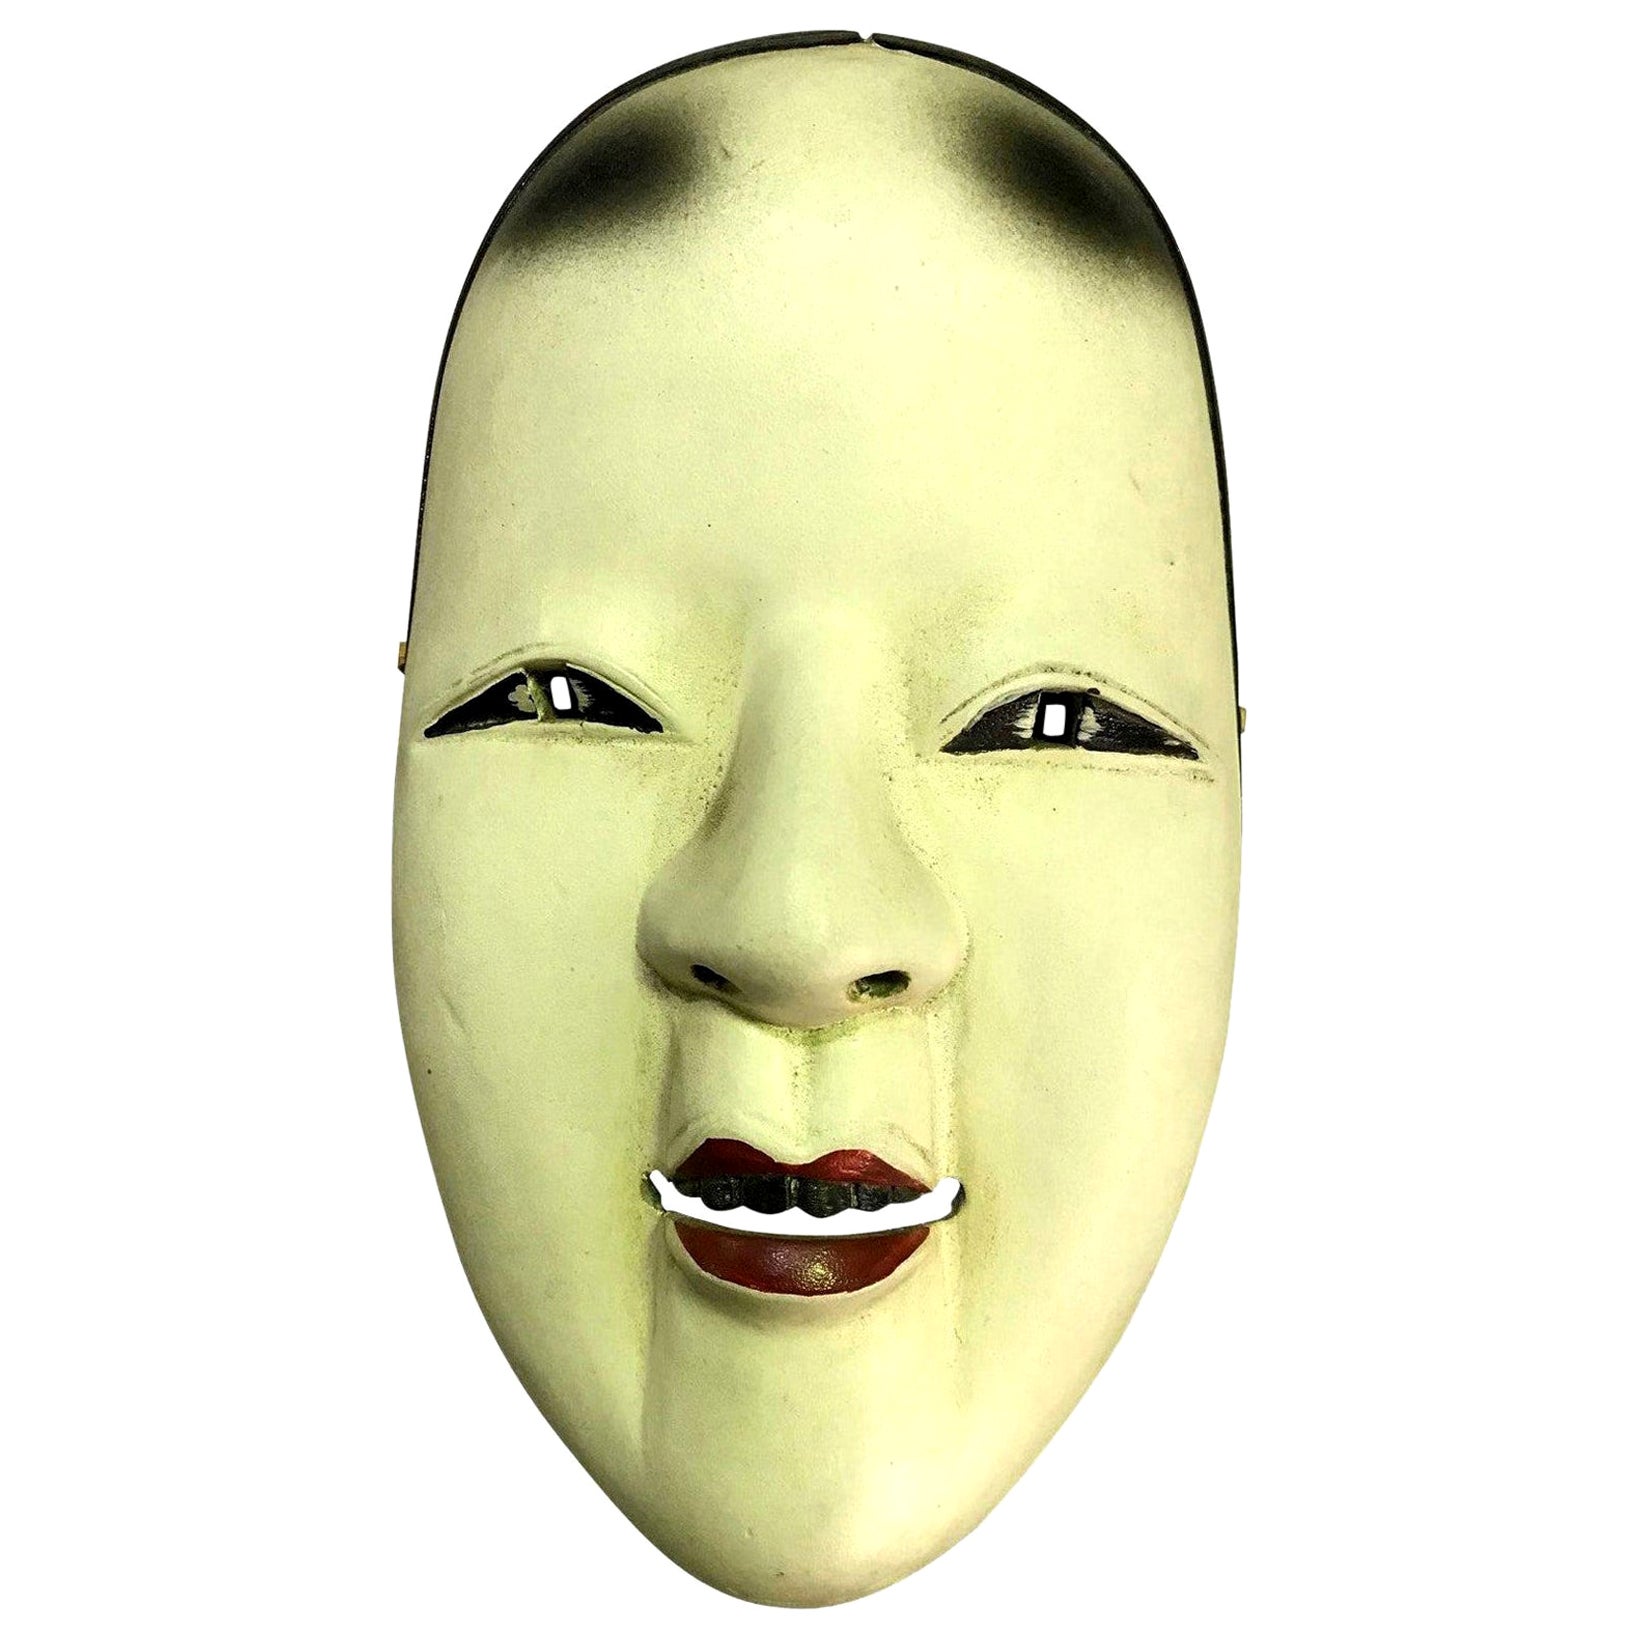 Japanese Okame Ko-Omote Wood Carved Noh Theater Mask